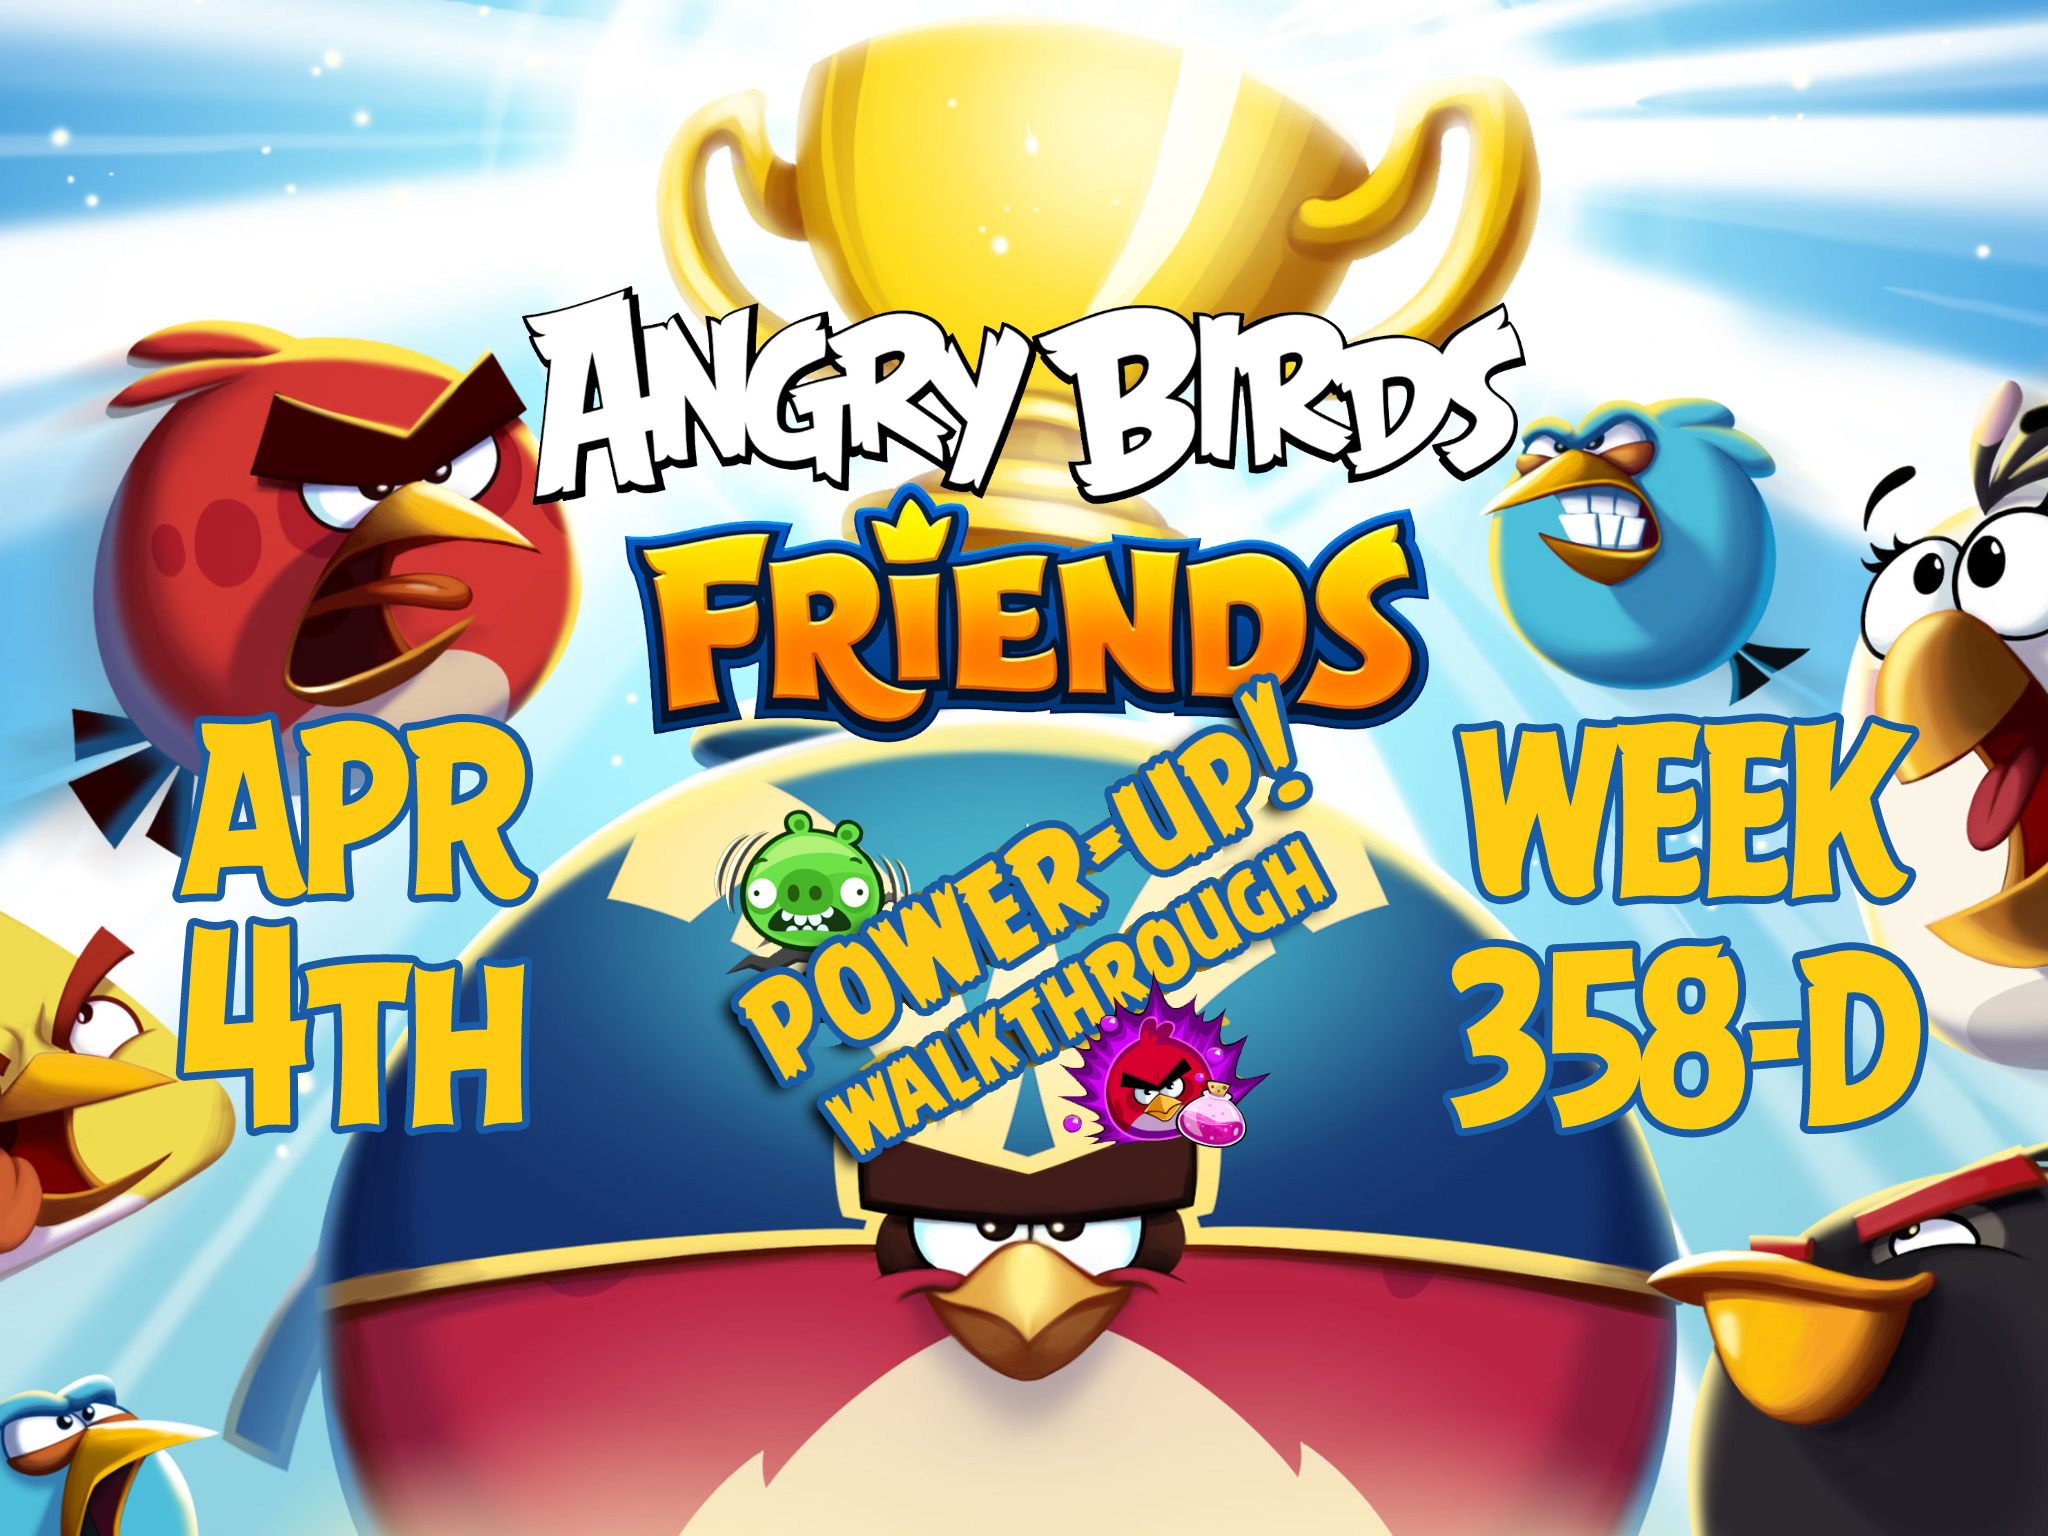 Angry-Birds-Friends-Tournament-Week-358-D-Feature-Image-PU